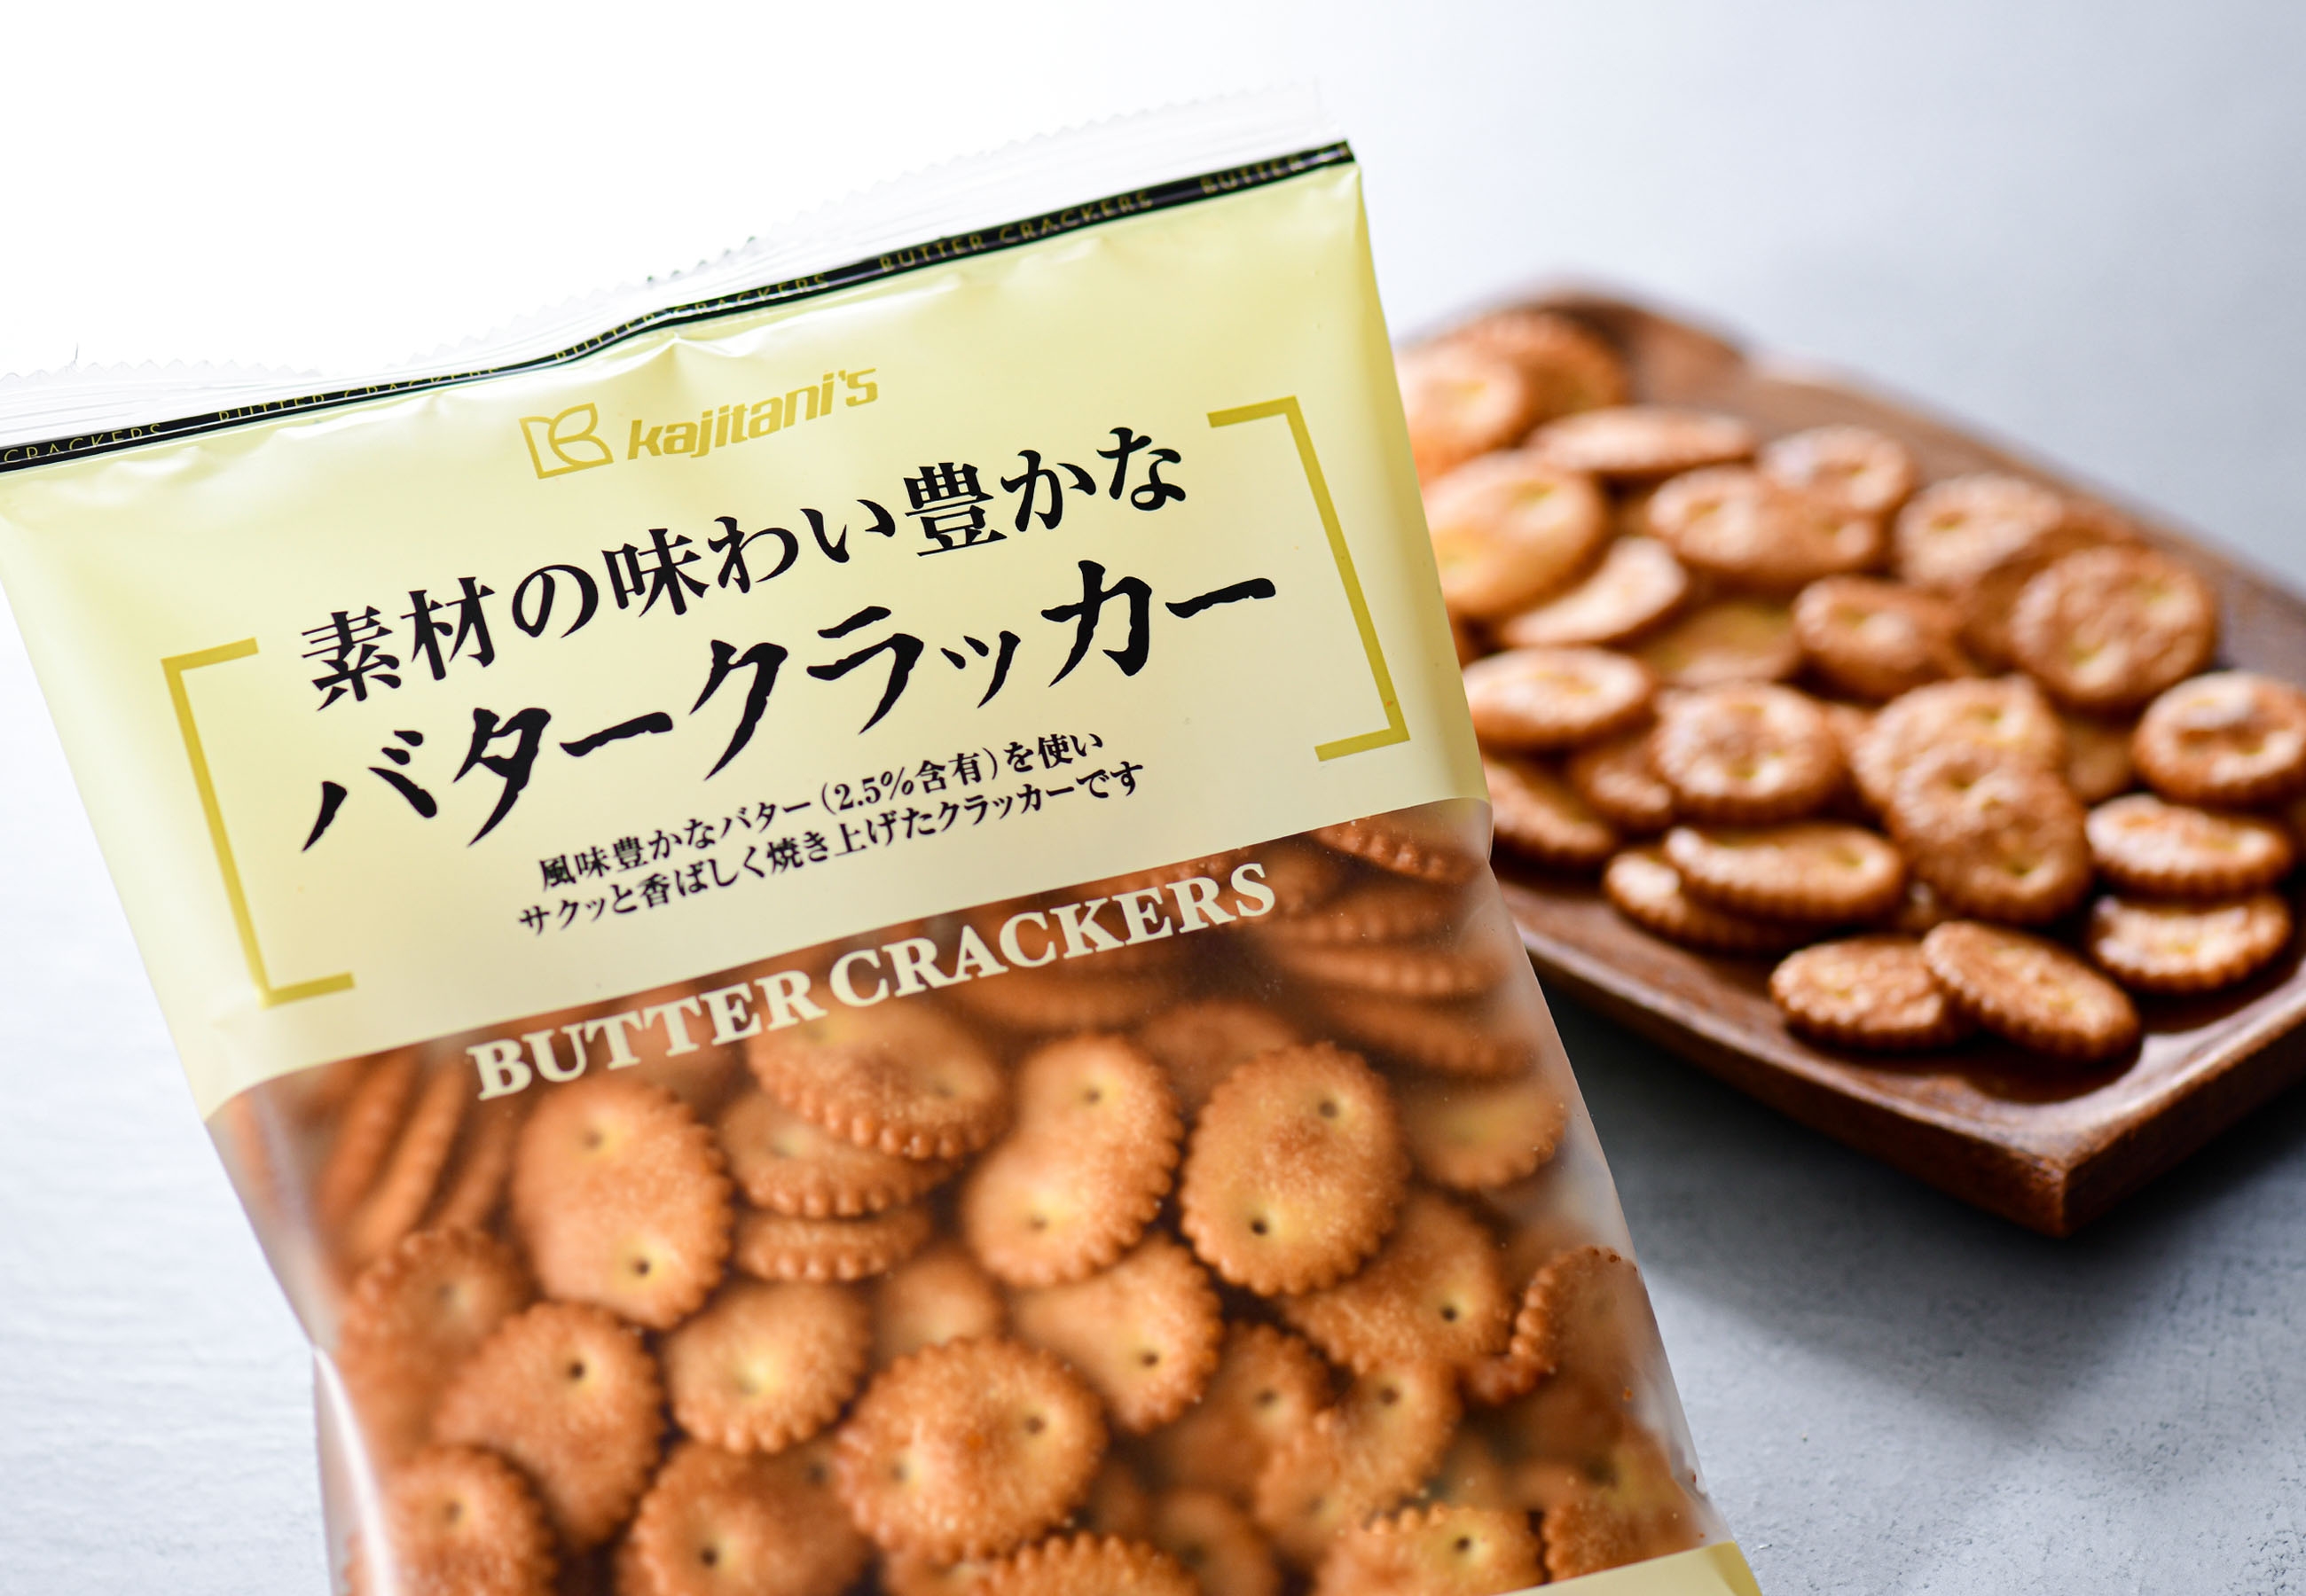 Butter Crackers with a rich flavor of ingredients